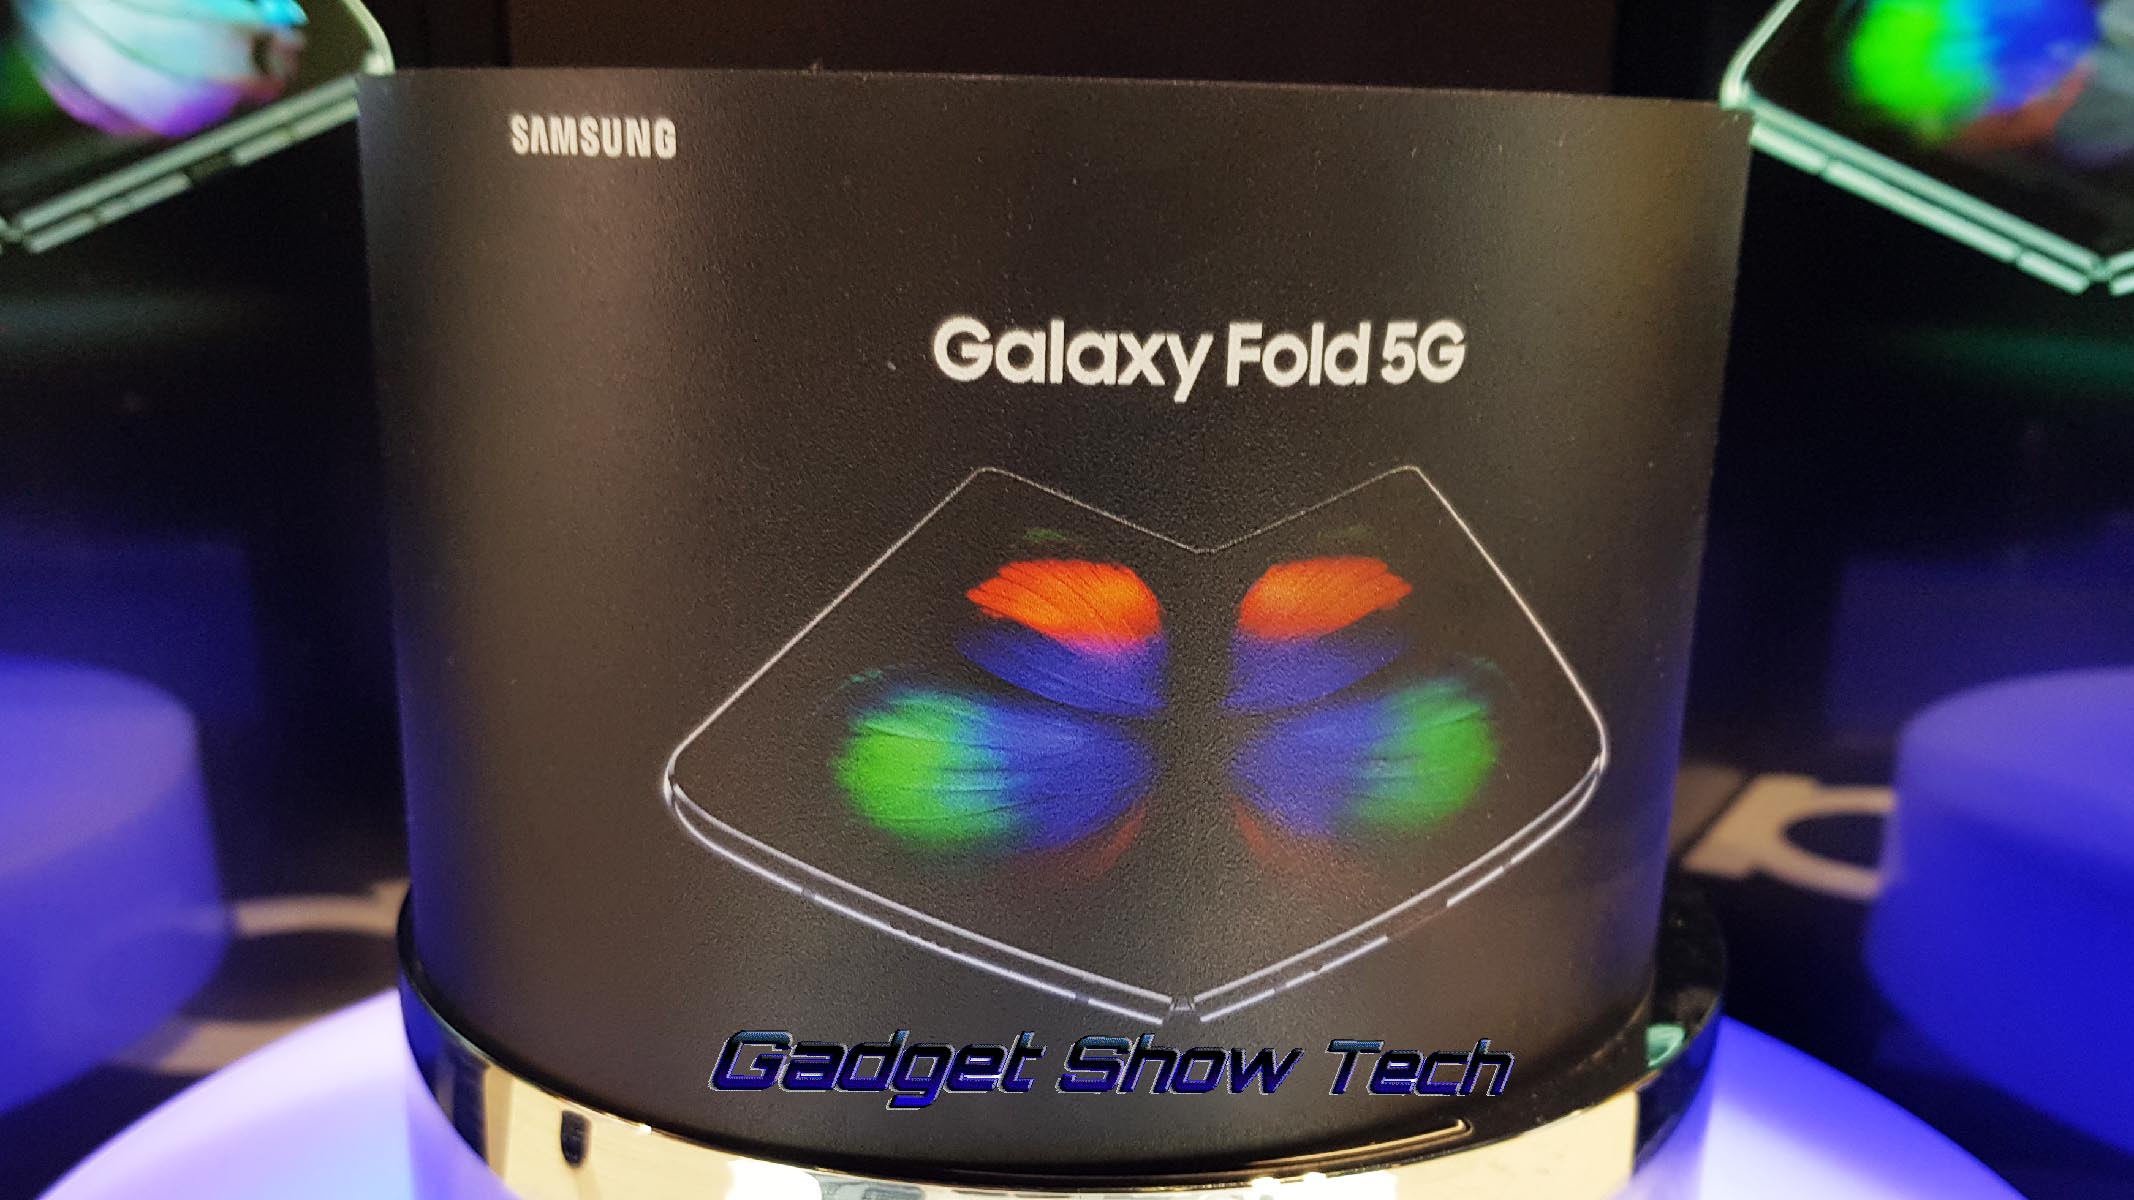 Samsung Galaxy FOLD 5G specs release new features 2020